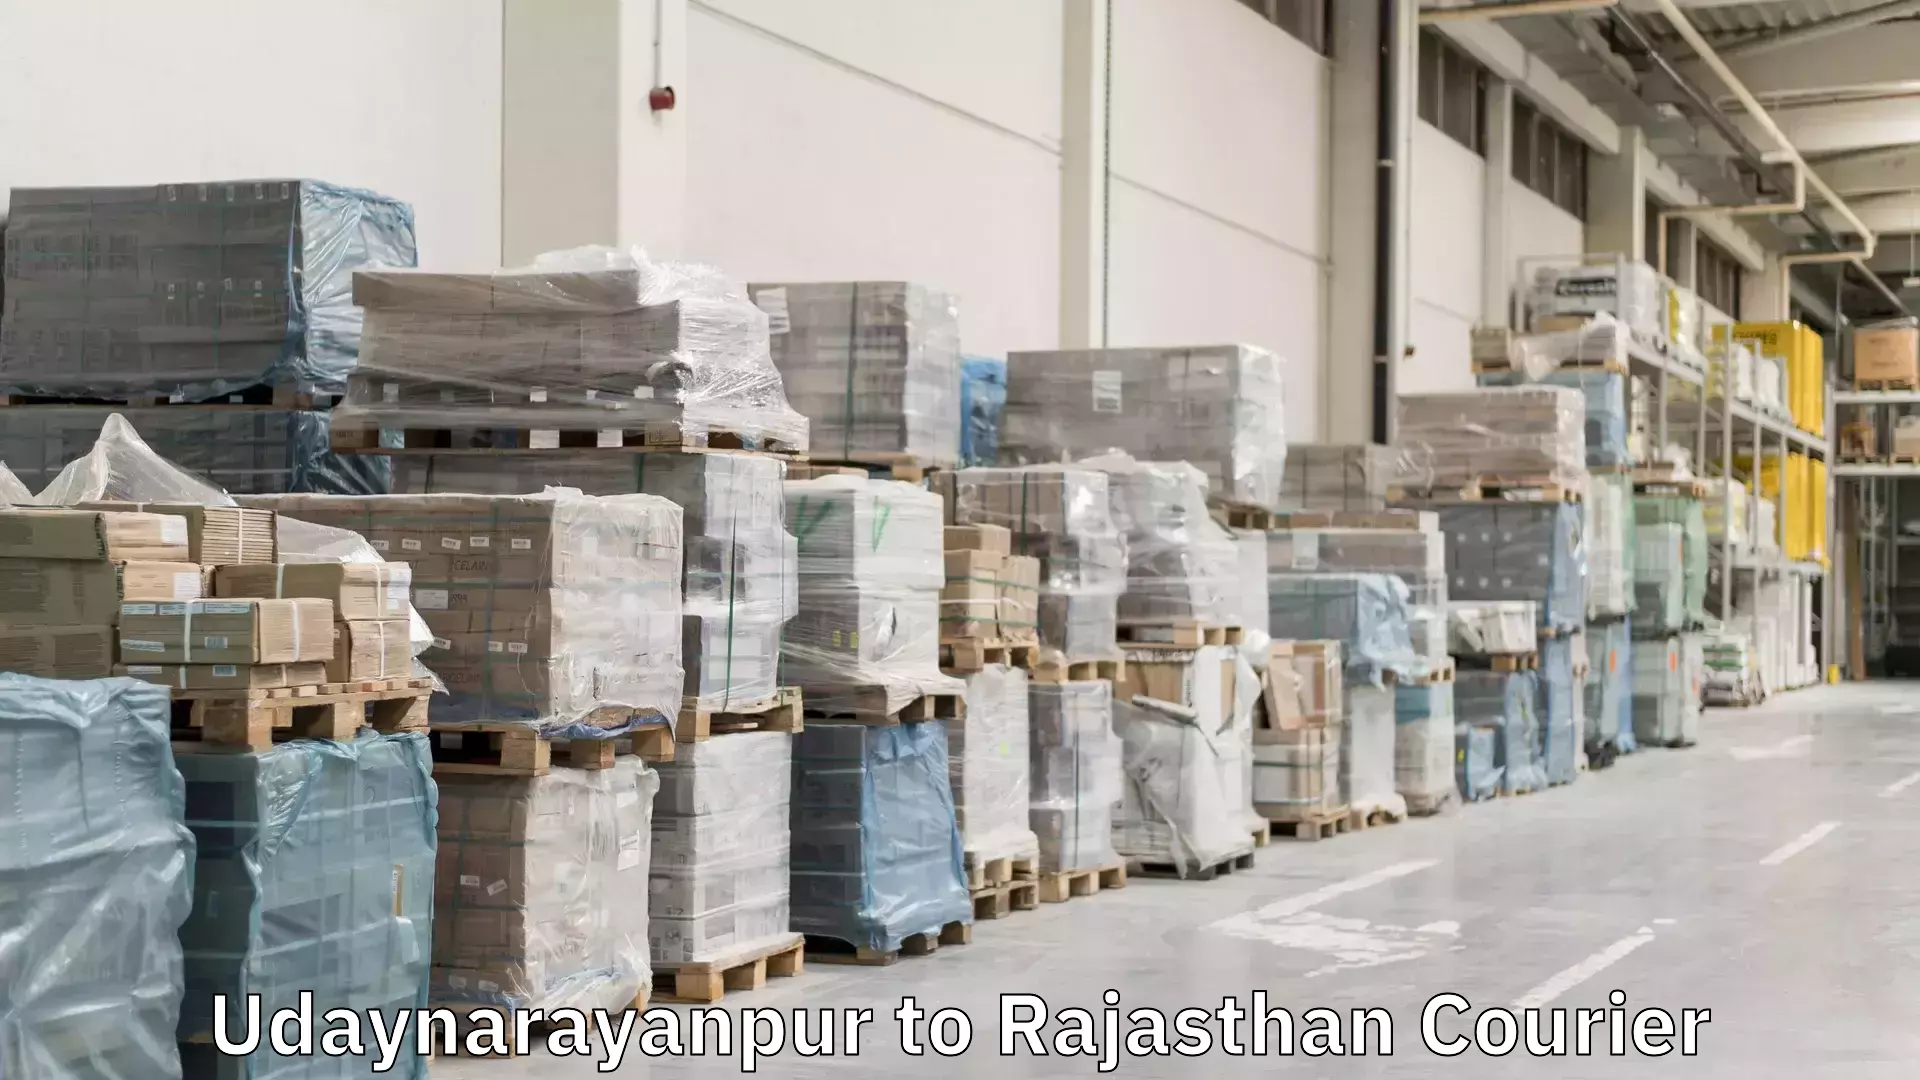 Reliable shipping partners Udaynarayanpur to Rajasthan